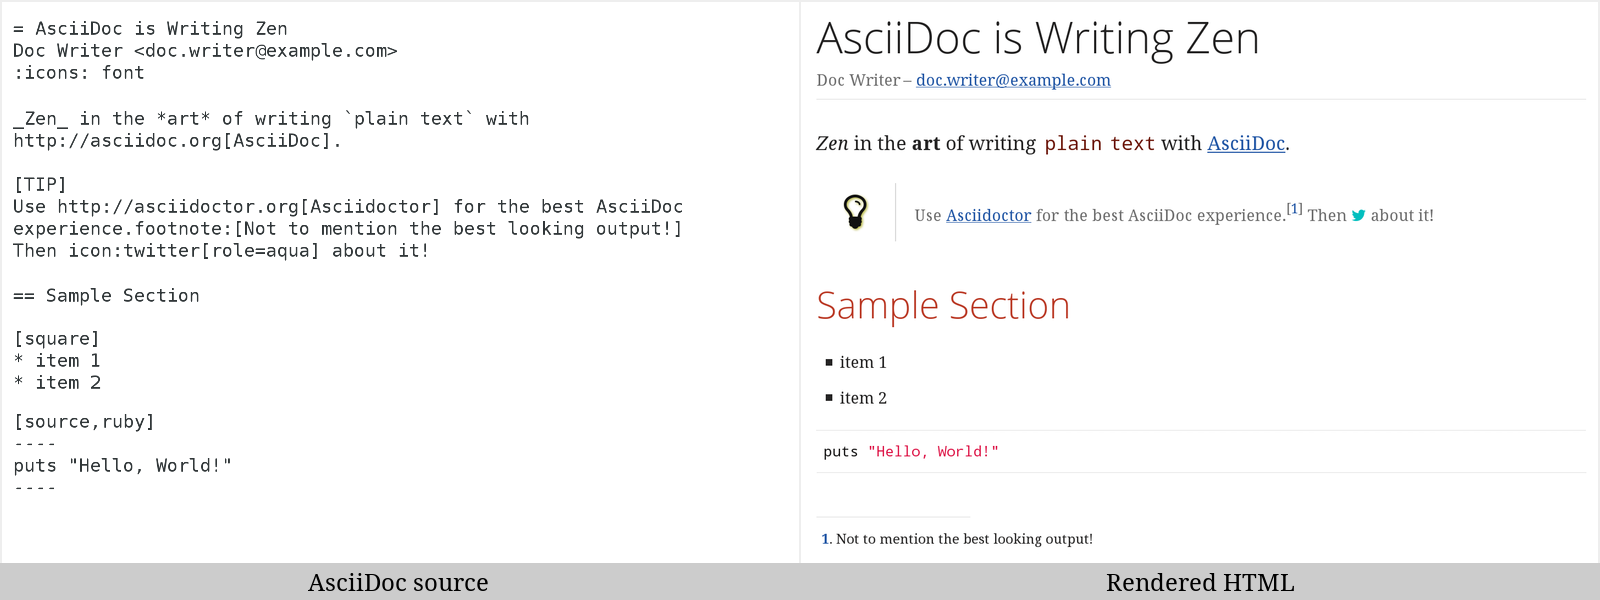 Preview of AsciiDoc source and corresponding rendered HTML